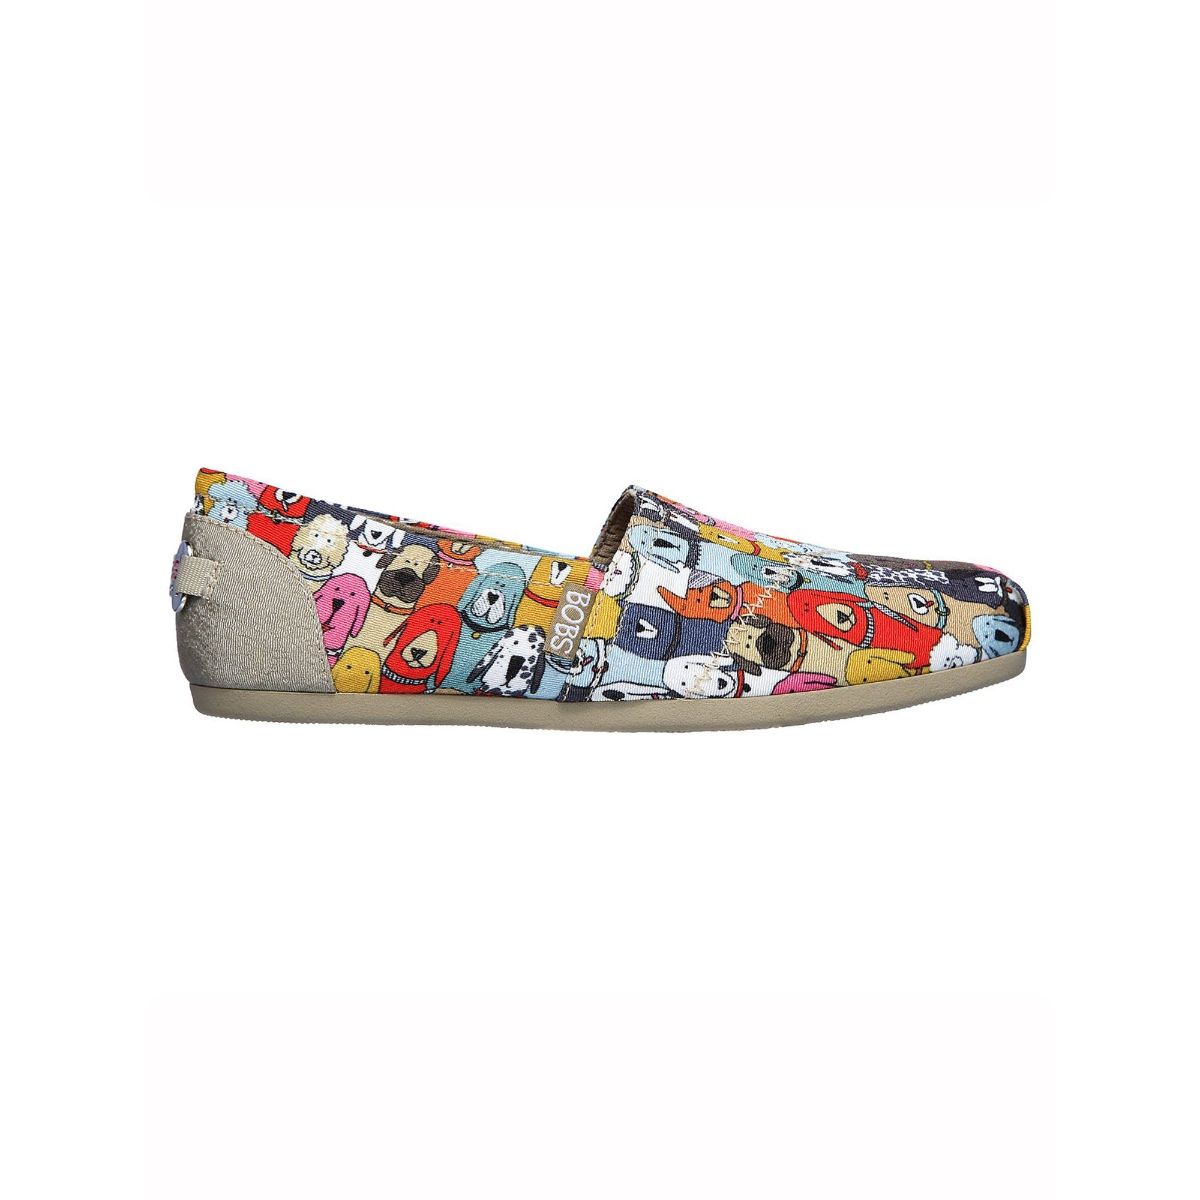 SKECHERS BOBS PLUSH WAG PARTY Multi Casual shoes: Buy SKECHERS BOBS ...